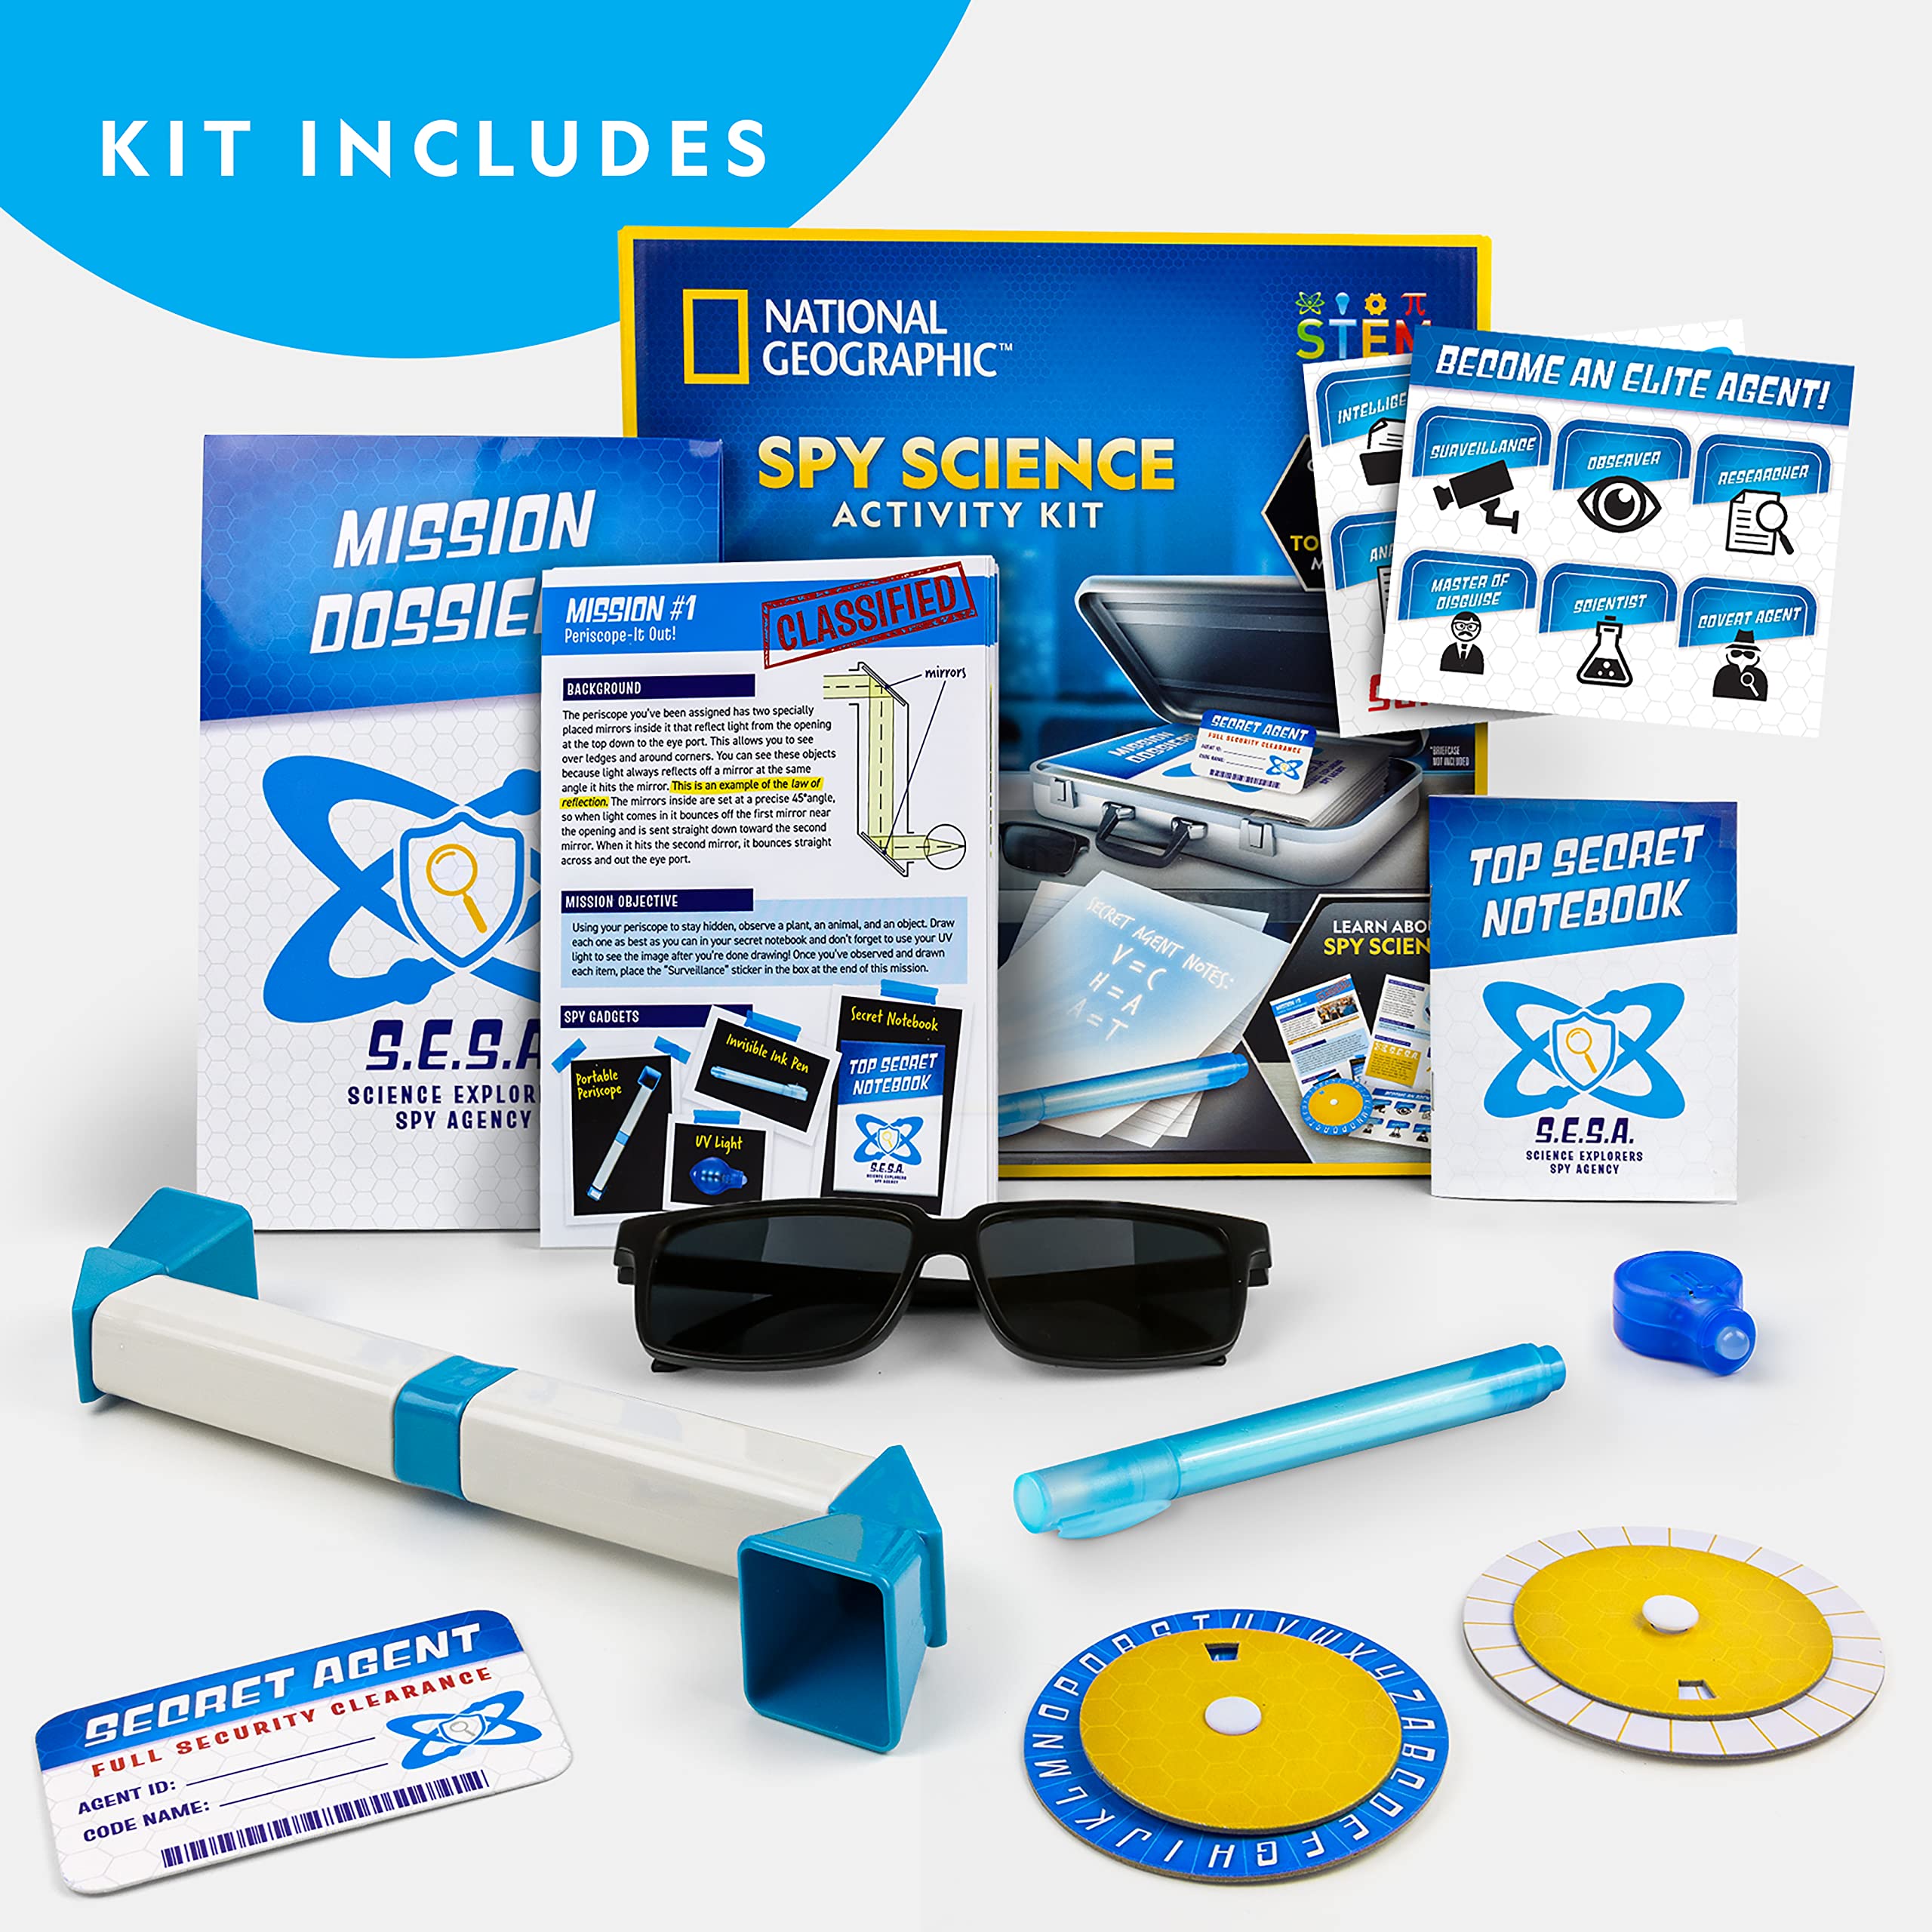 NATIONAL GEOGRAPHIC Spy Science Kit - Kids Spy Activity Set, Complete 10 Secret Spy Missions with Spy Gadgets for Kids and Spy Gear, Kids Detective Kit, Science Kits for Kids, Pretend Play